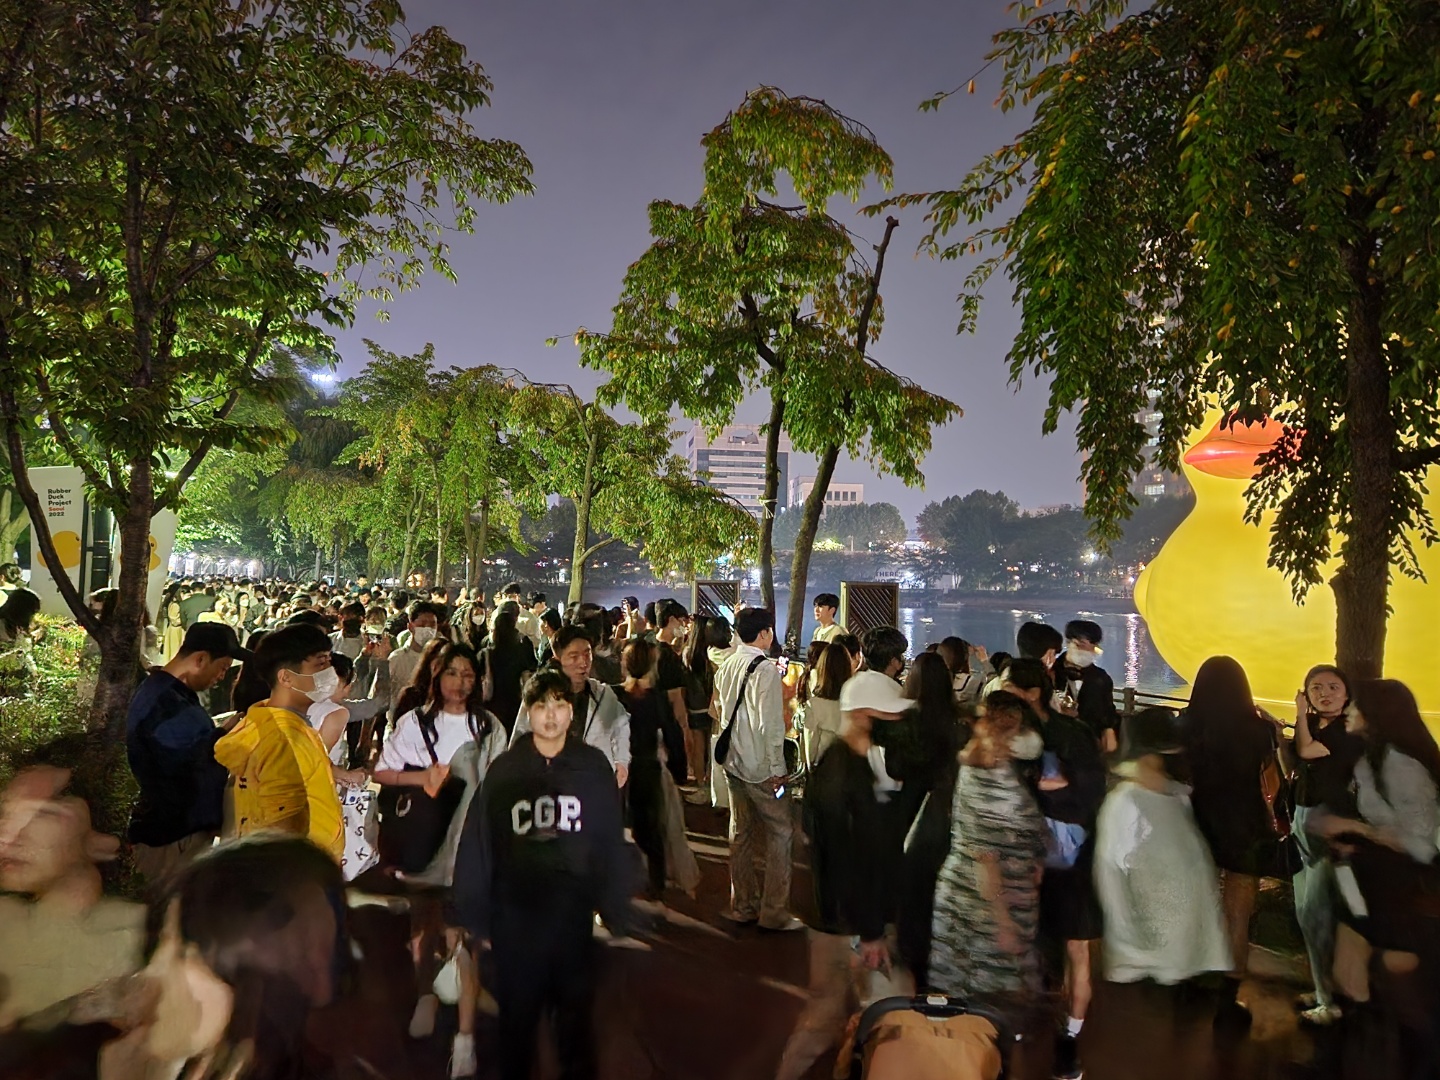 Rubber Duck Project Seoul 2022